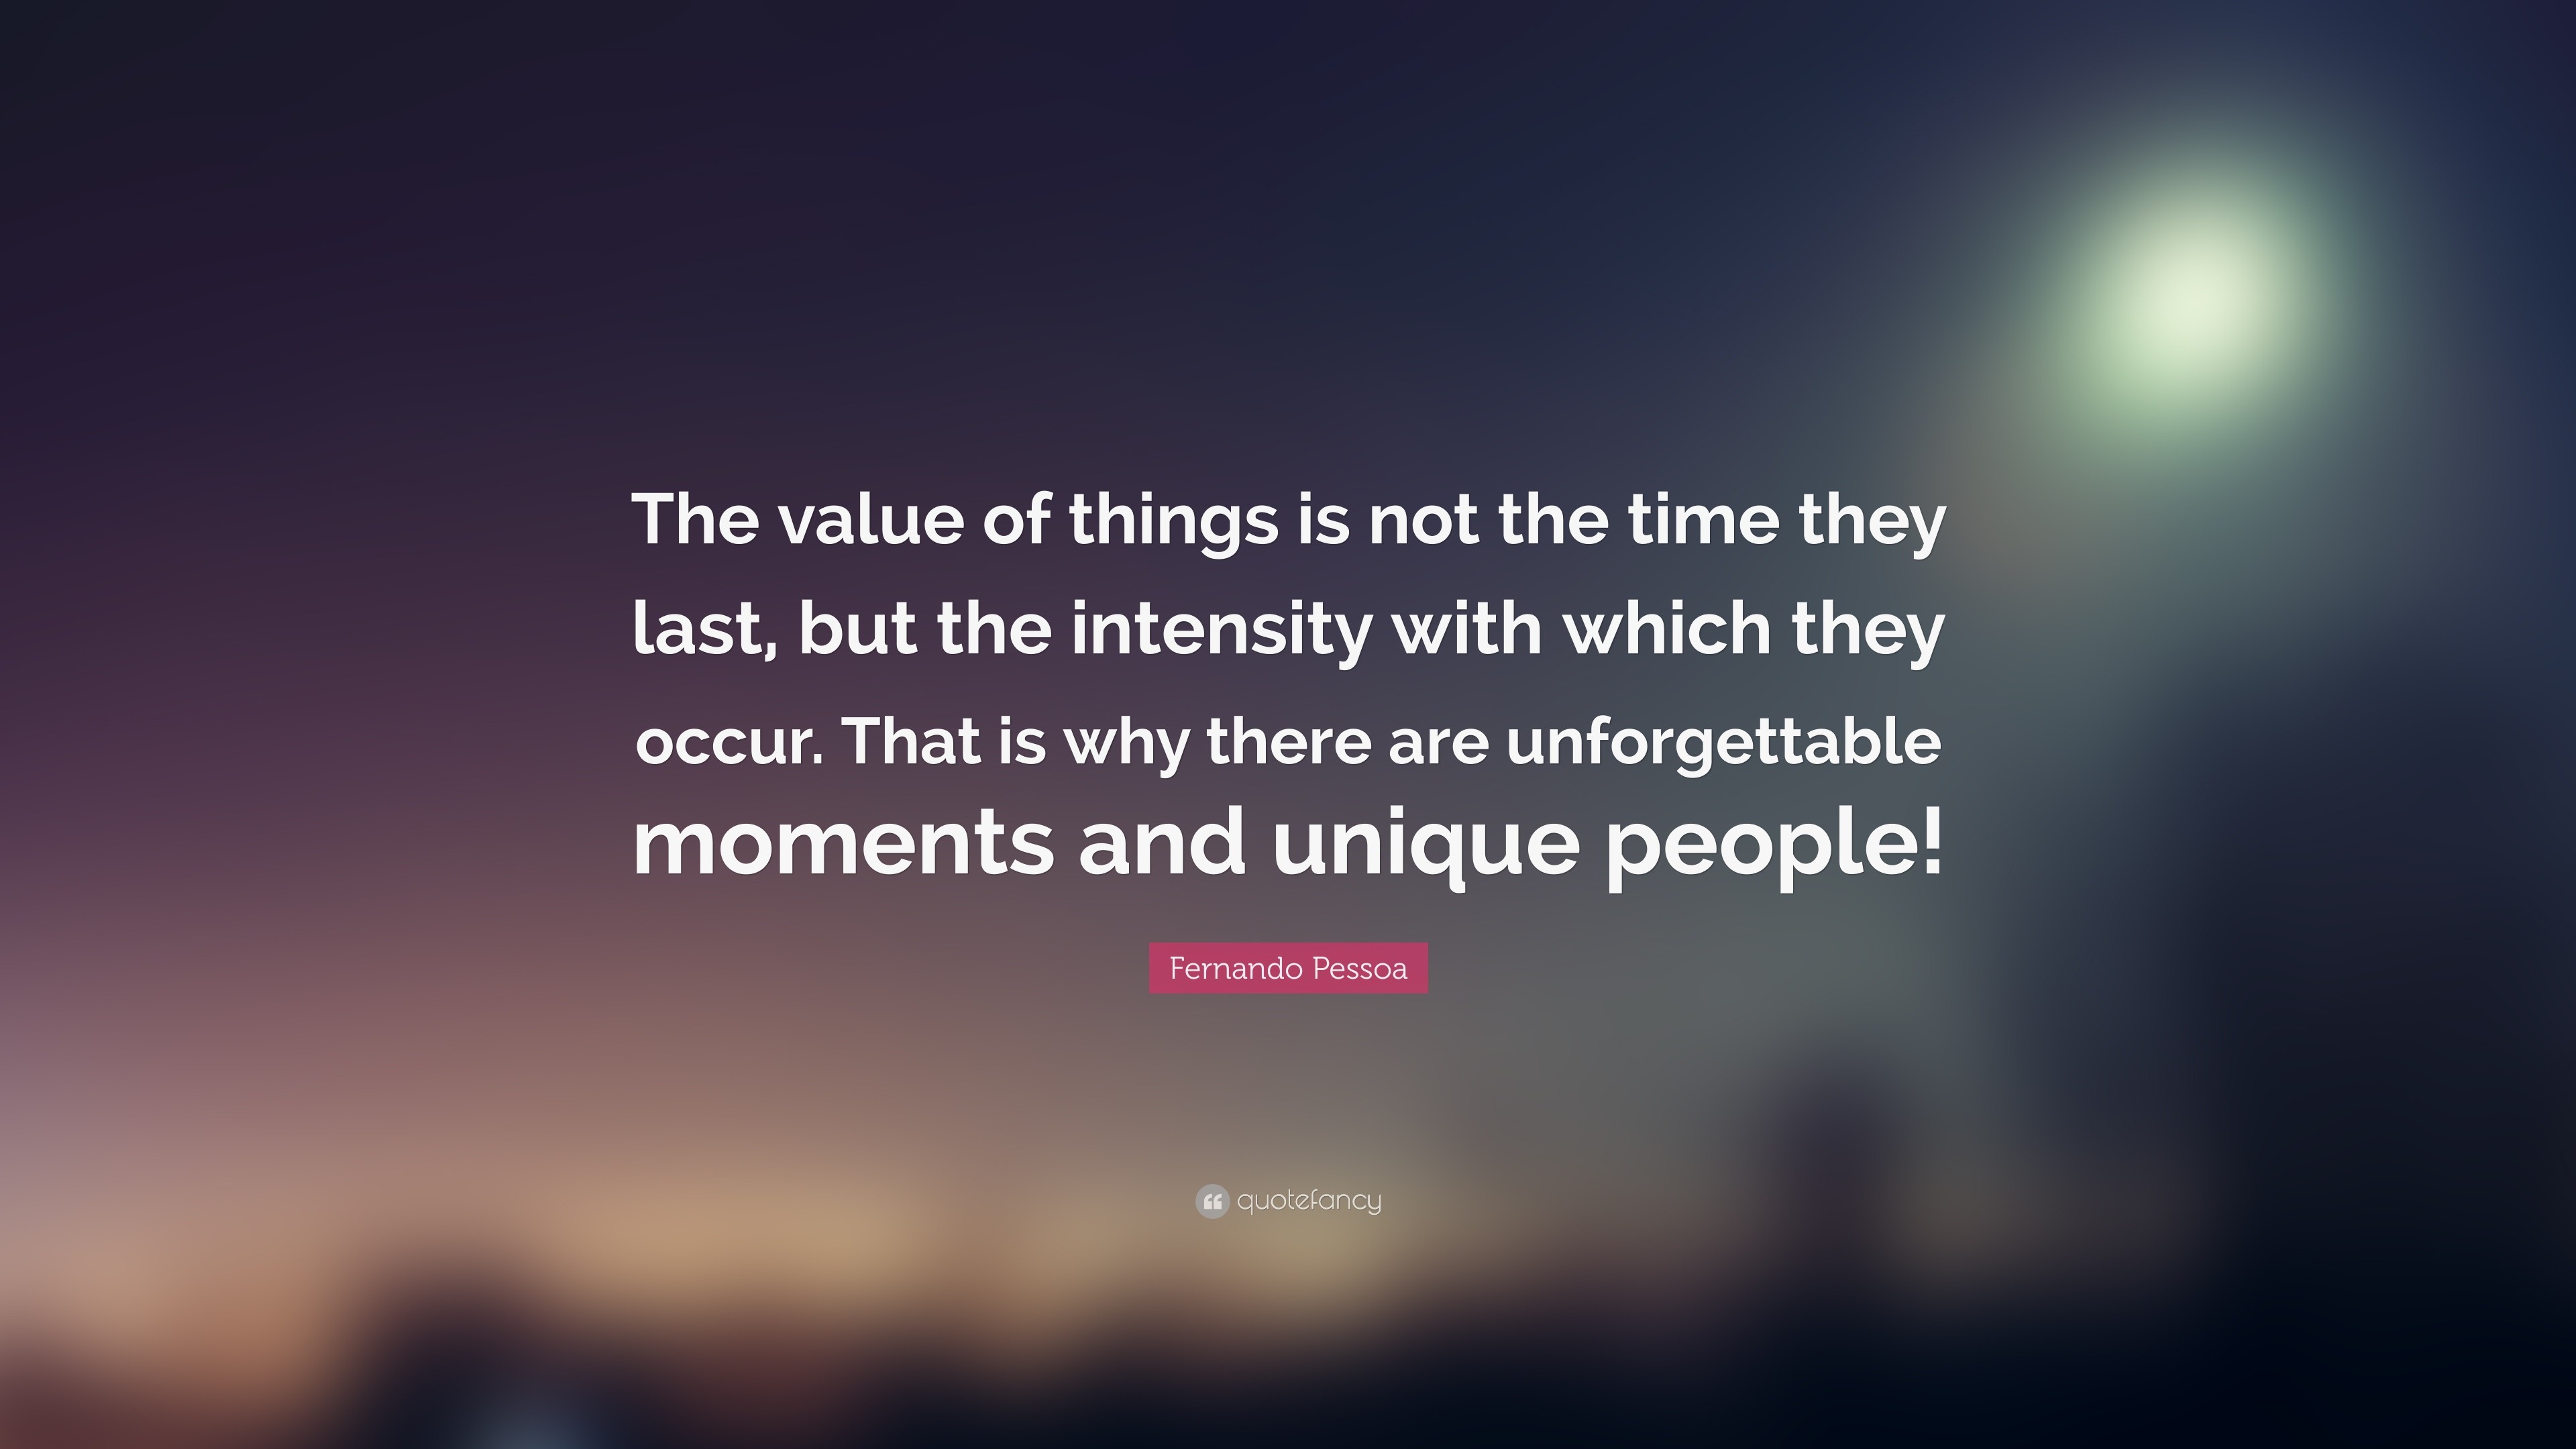 Fernando Pessoa Quote: “The value of things is not the time they last